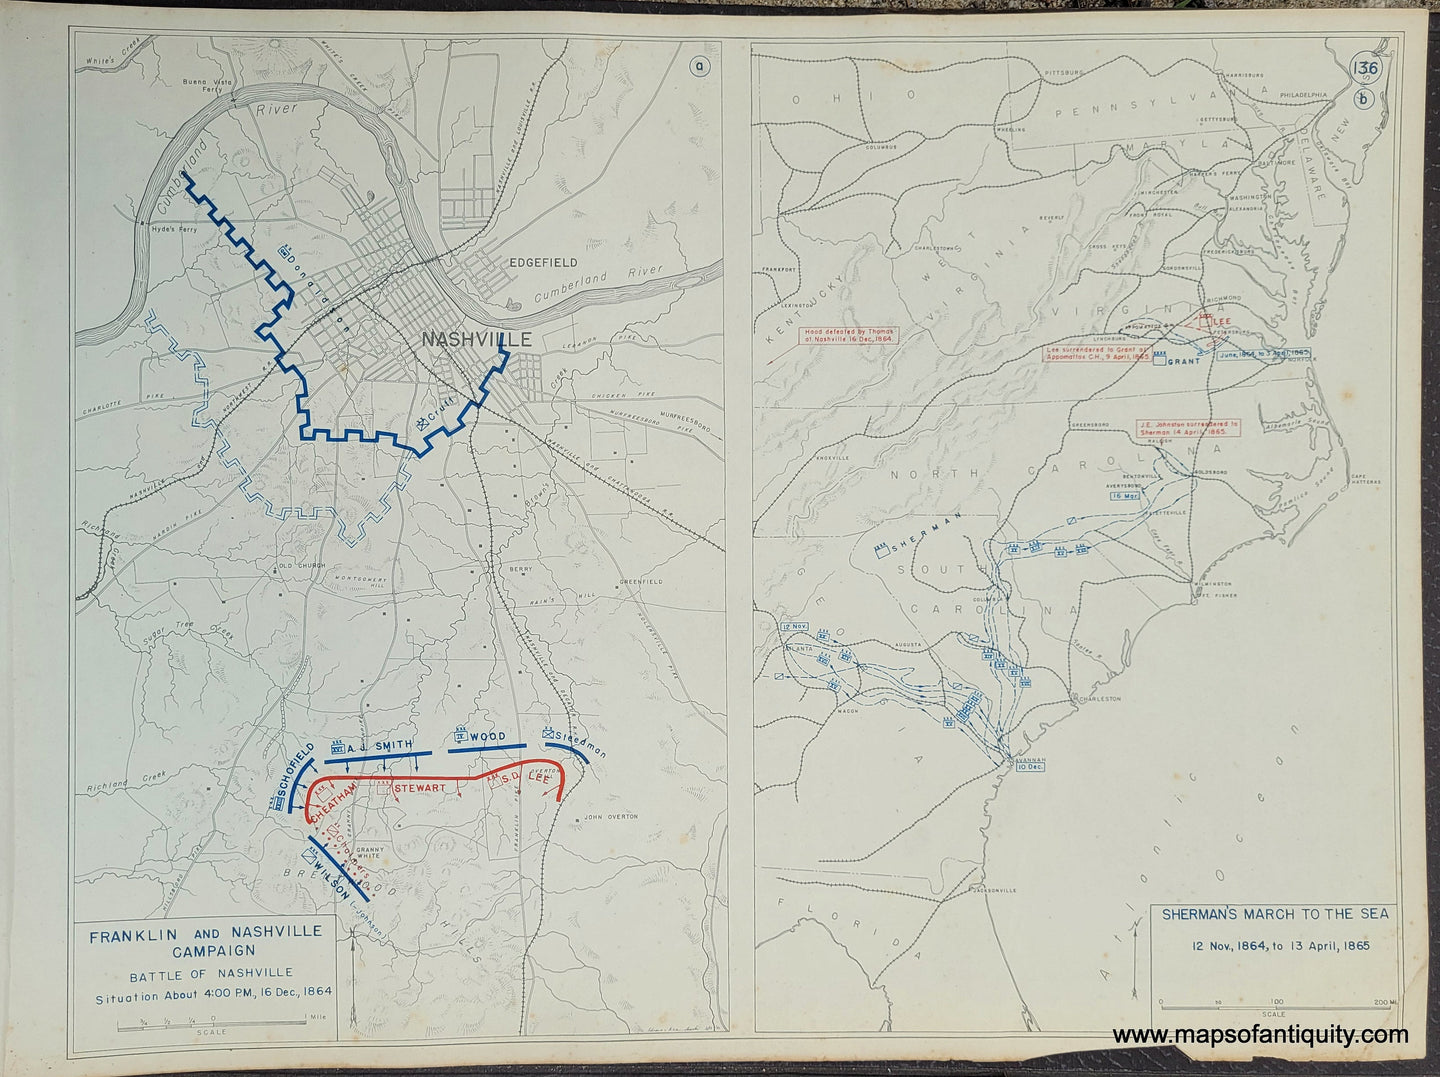 Genuine-Antique-Map-Franklin-and-Nashville-Campaign-Battle-of-Nashville-Situation-About-4-00PM-16-De--1864-Sherman's-March-to-the-Sea-12-Nov--1864-to-13-April-1865-1948-Matthew-Forney-Steele-Dept-of-Military-Art-and-Engineering-US-Military-Academy-West-Point-Maps-Of-Antiquity